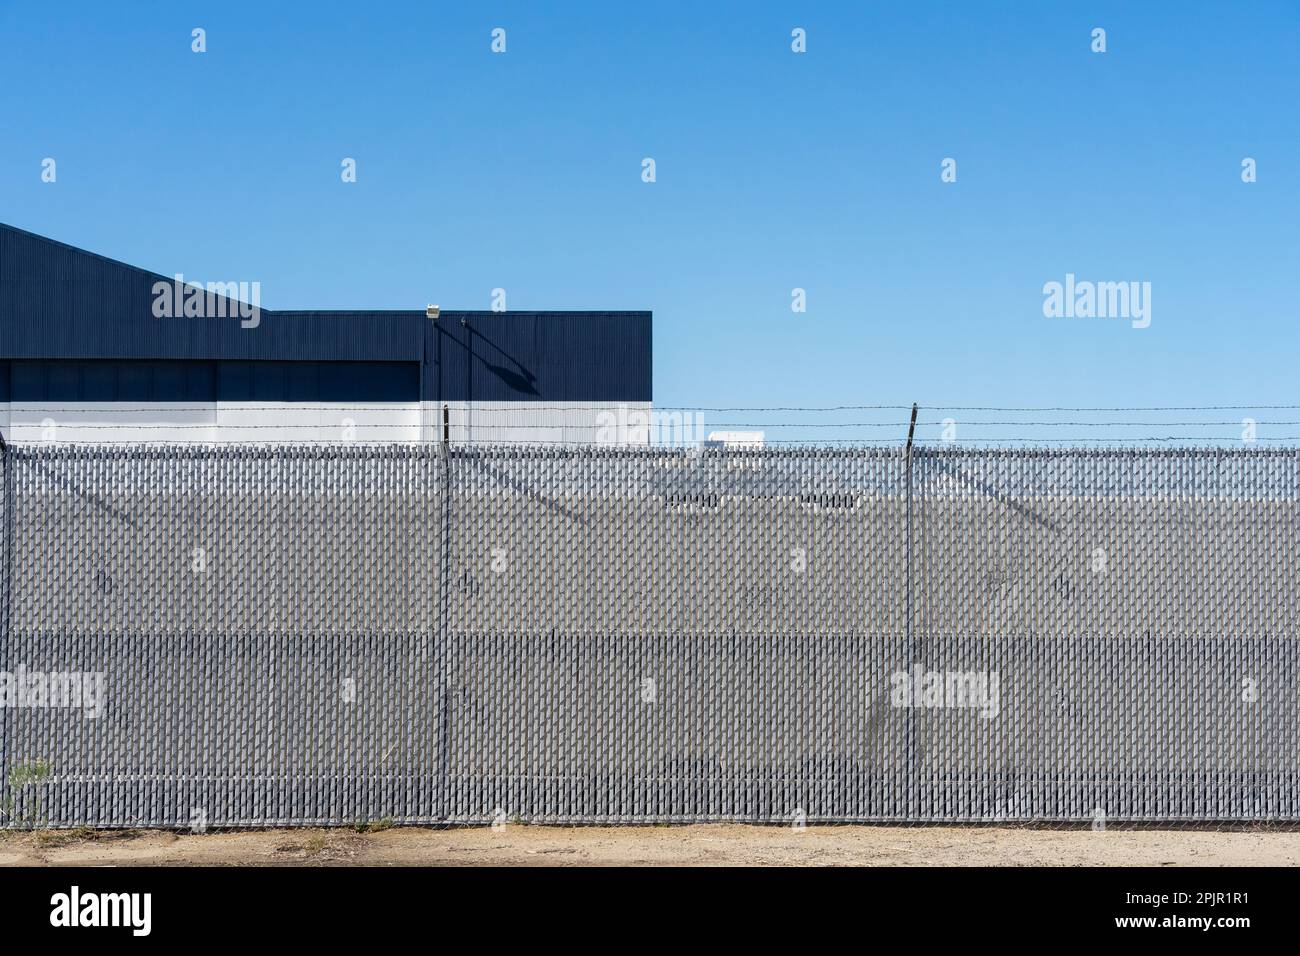 Chain link security fencing with vinyl slats and barbed wire topper in front of a building Stock Photo